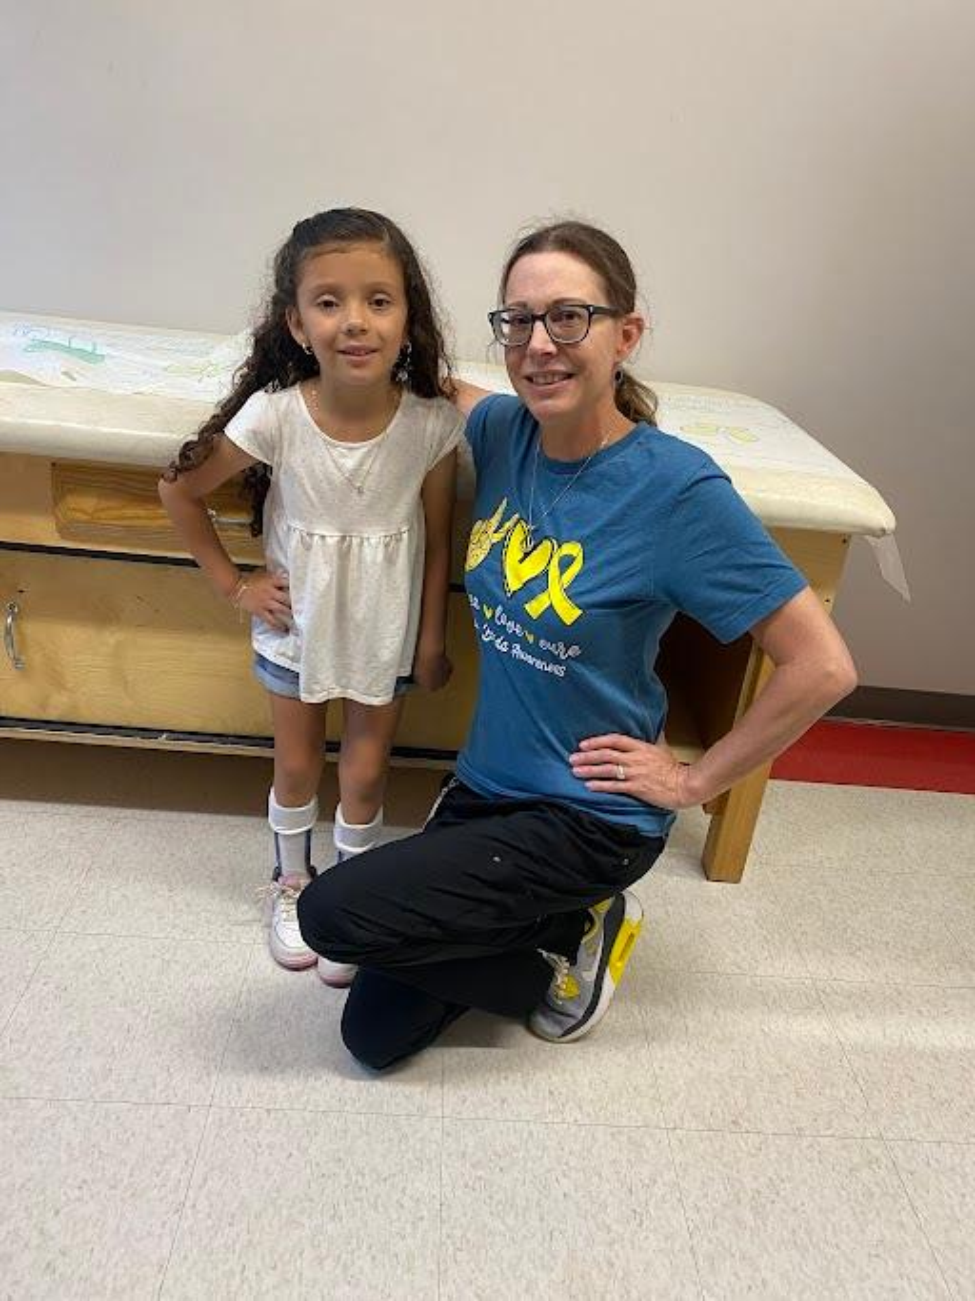 Alison poses for a photo with pediatric orthopedic surgeon Lindsay Crawford, MD, in clinic. (Photo provided by Shelly Casey)